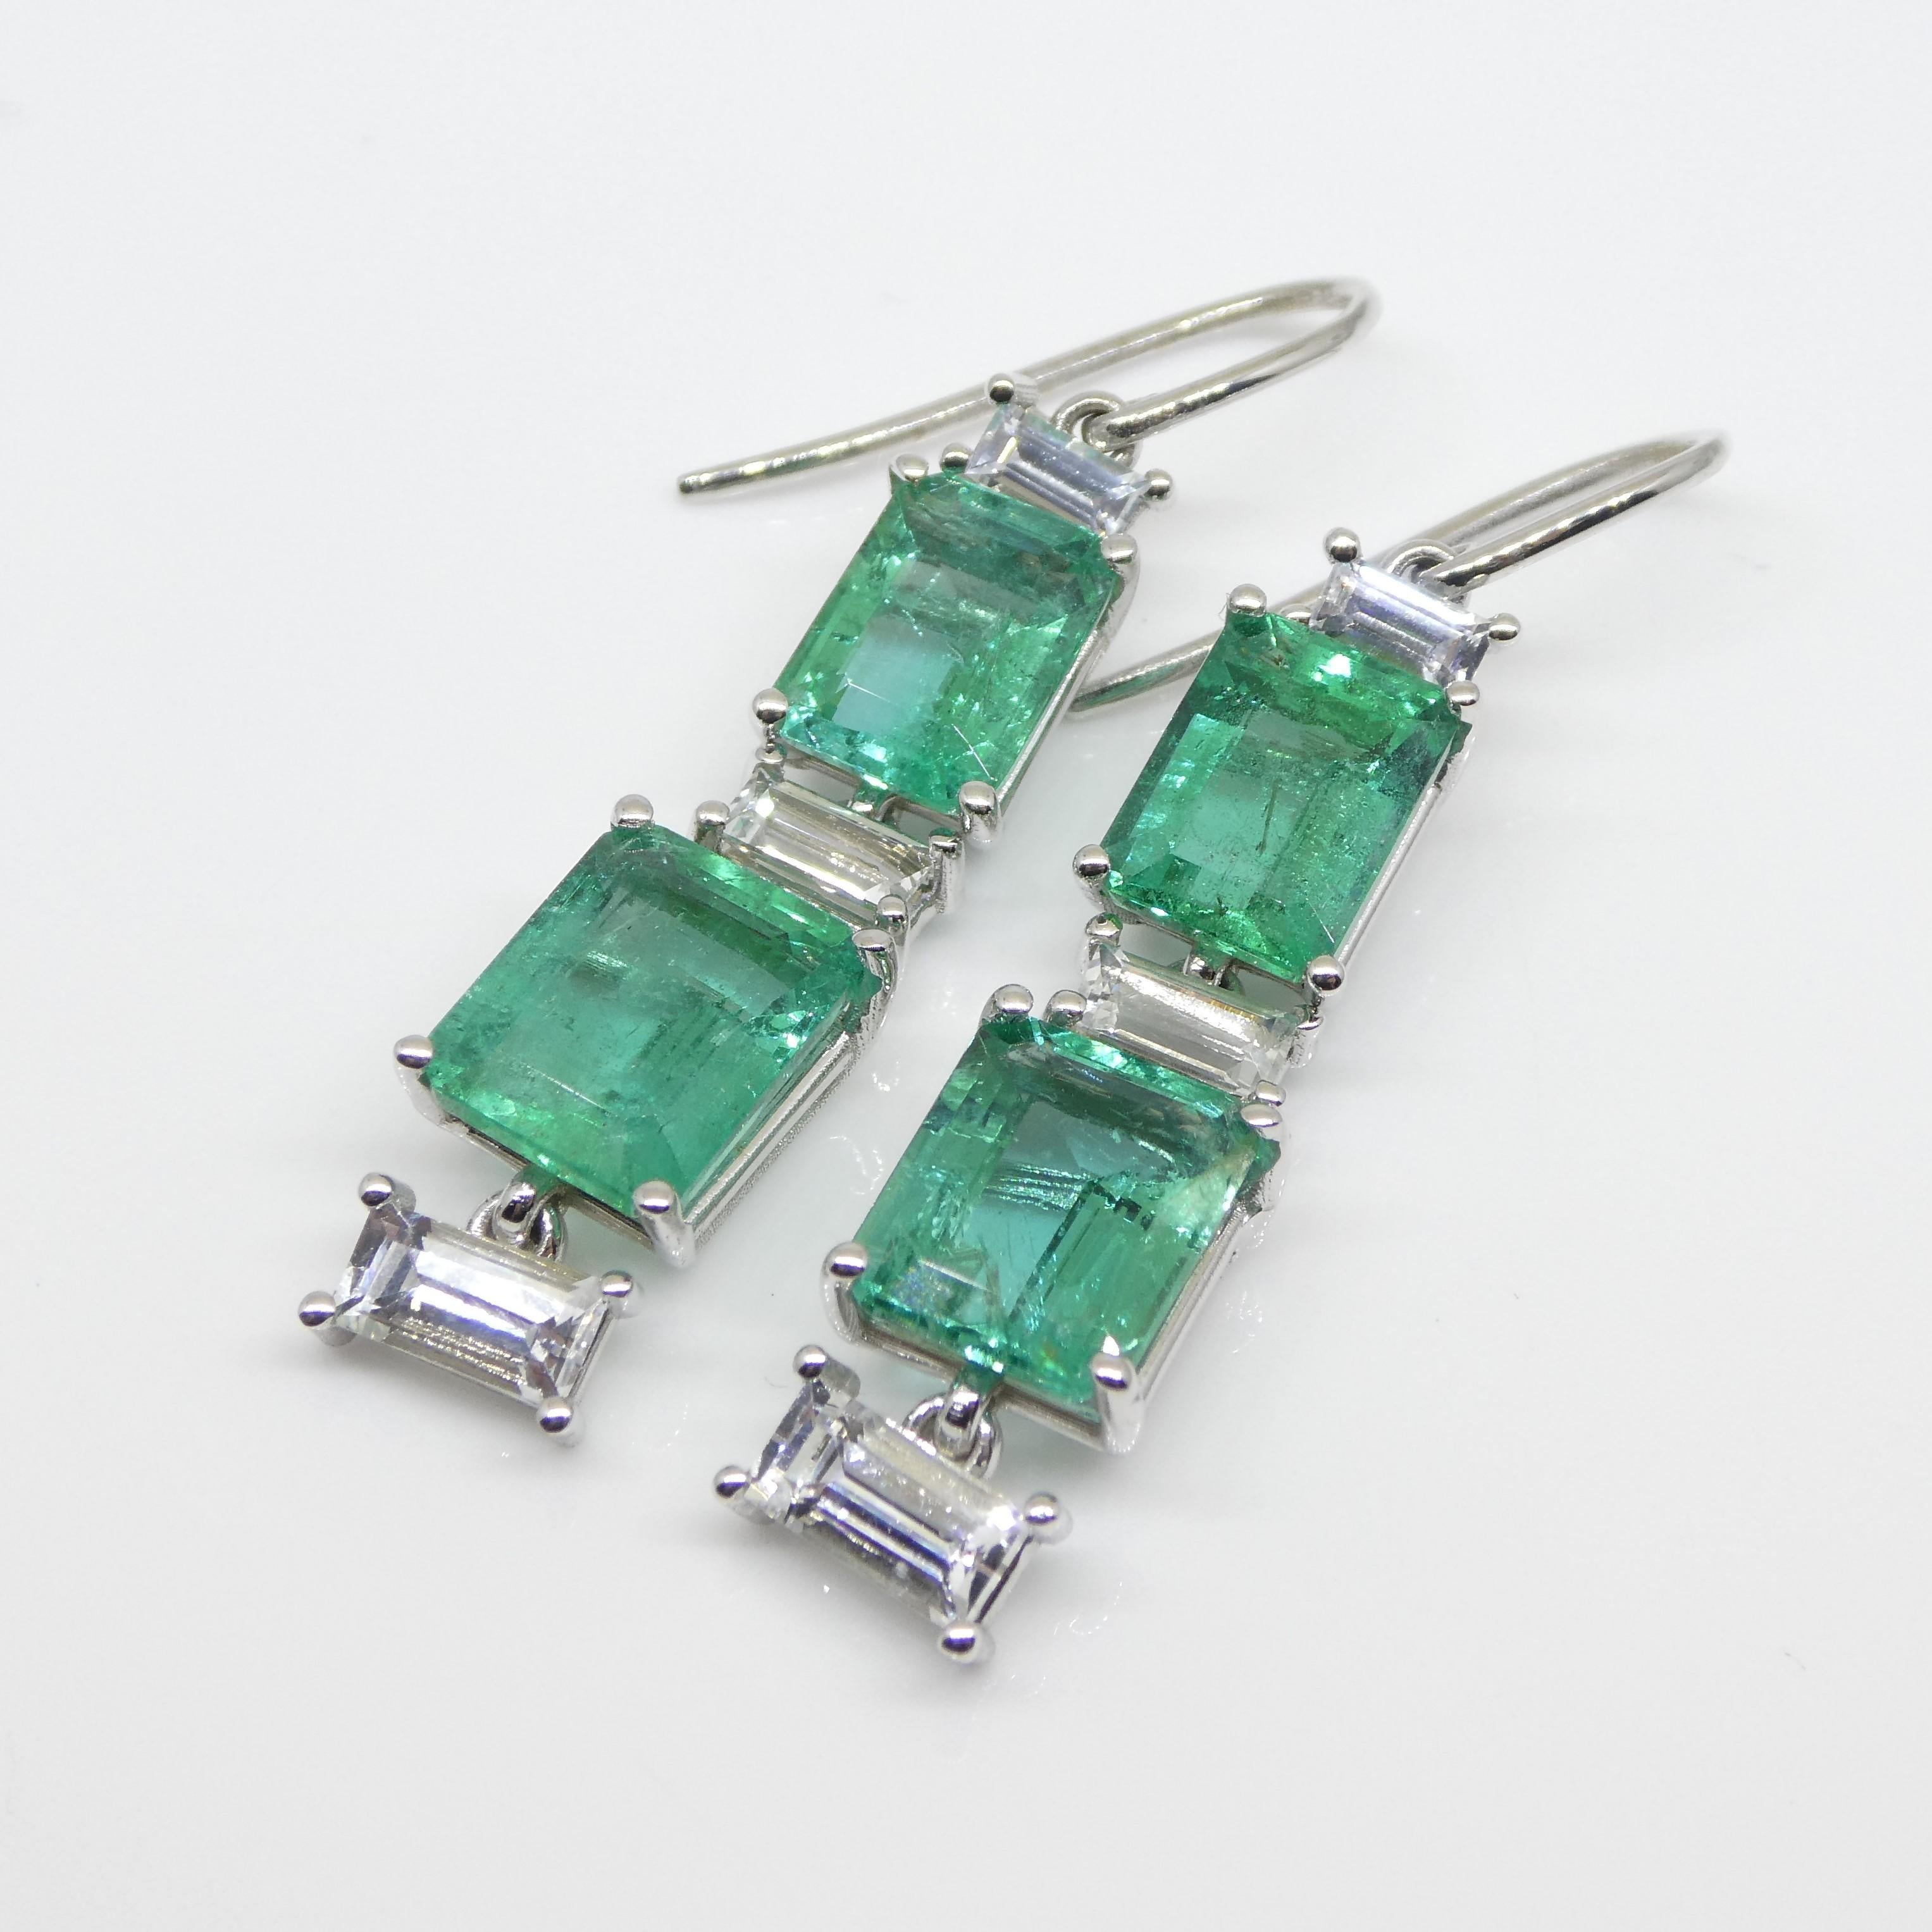 7.80ct Emerald, 1.80ct White Sapphire Earrings in 14k White Gold 13